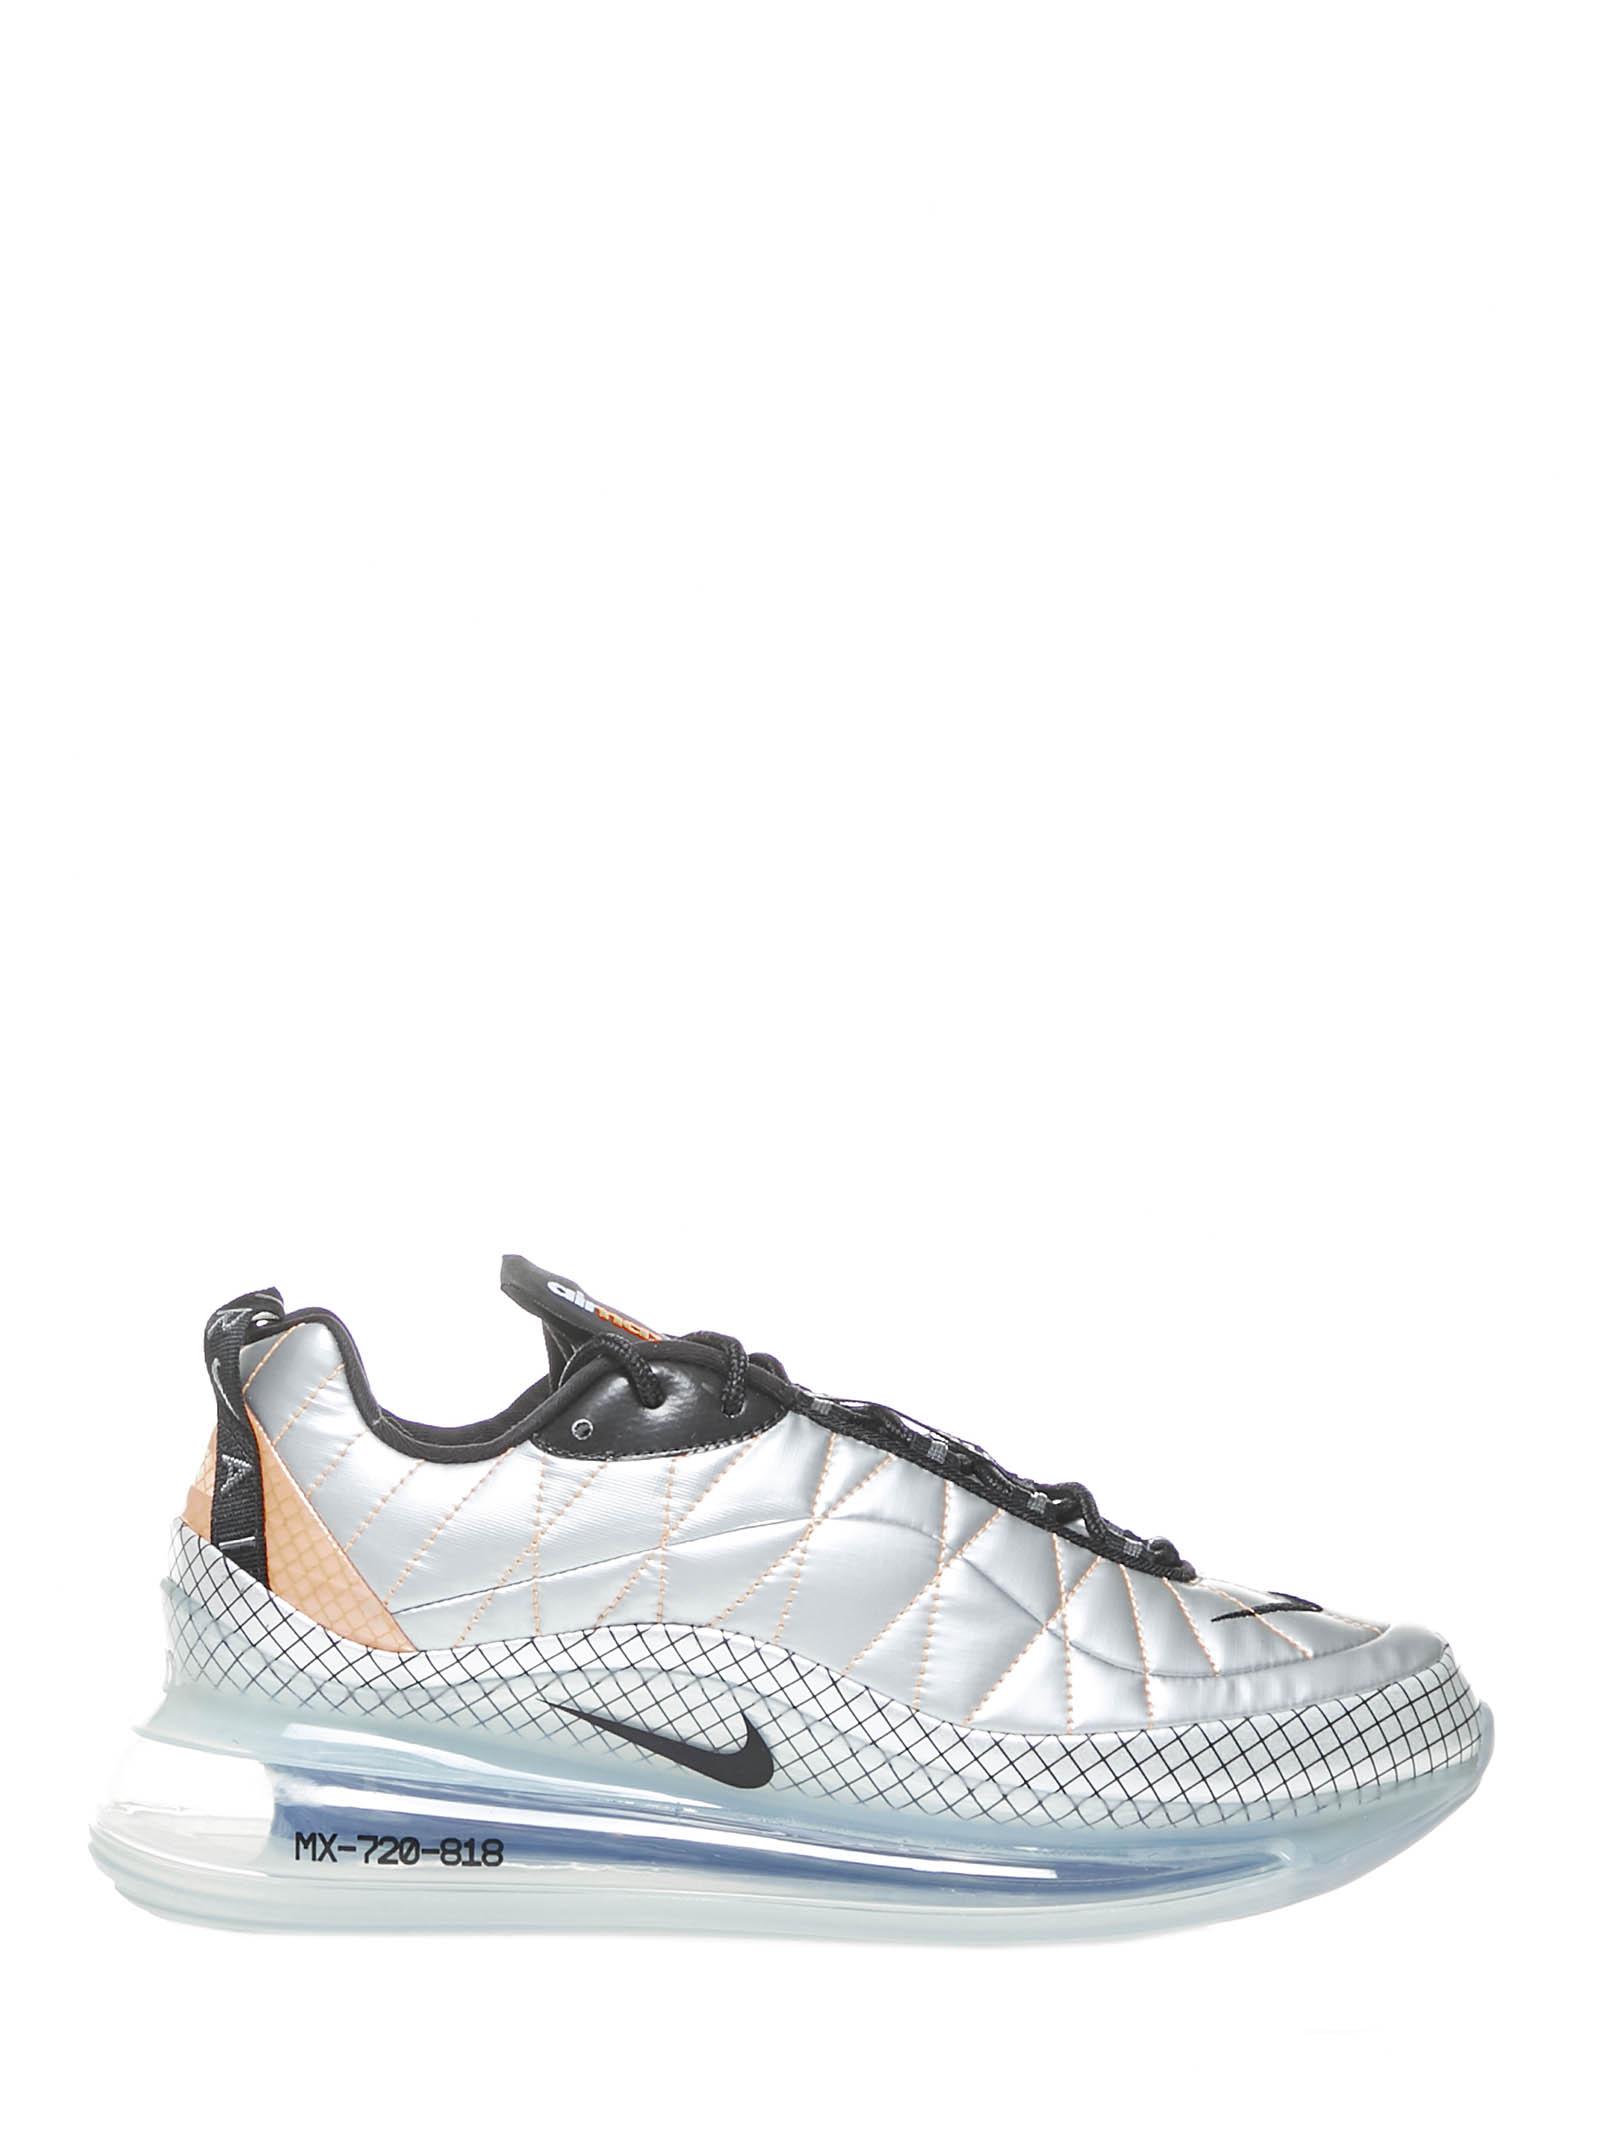 Nike Synthetic Air Max 720 in Silver (Metallic) for Men | Lyst تطبيق كوبونات خصم